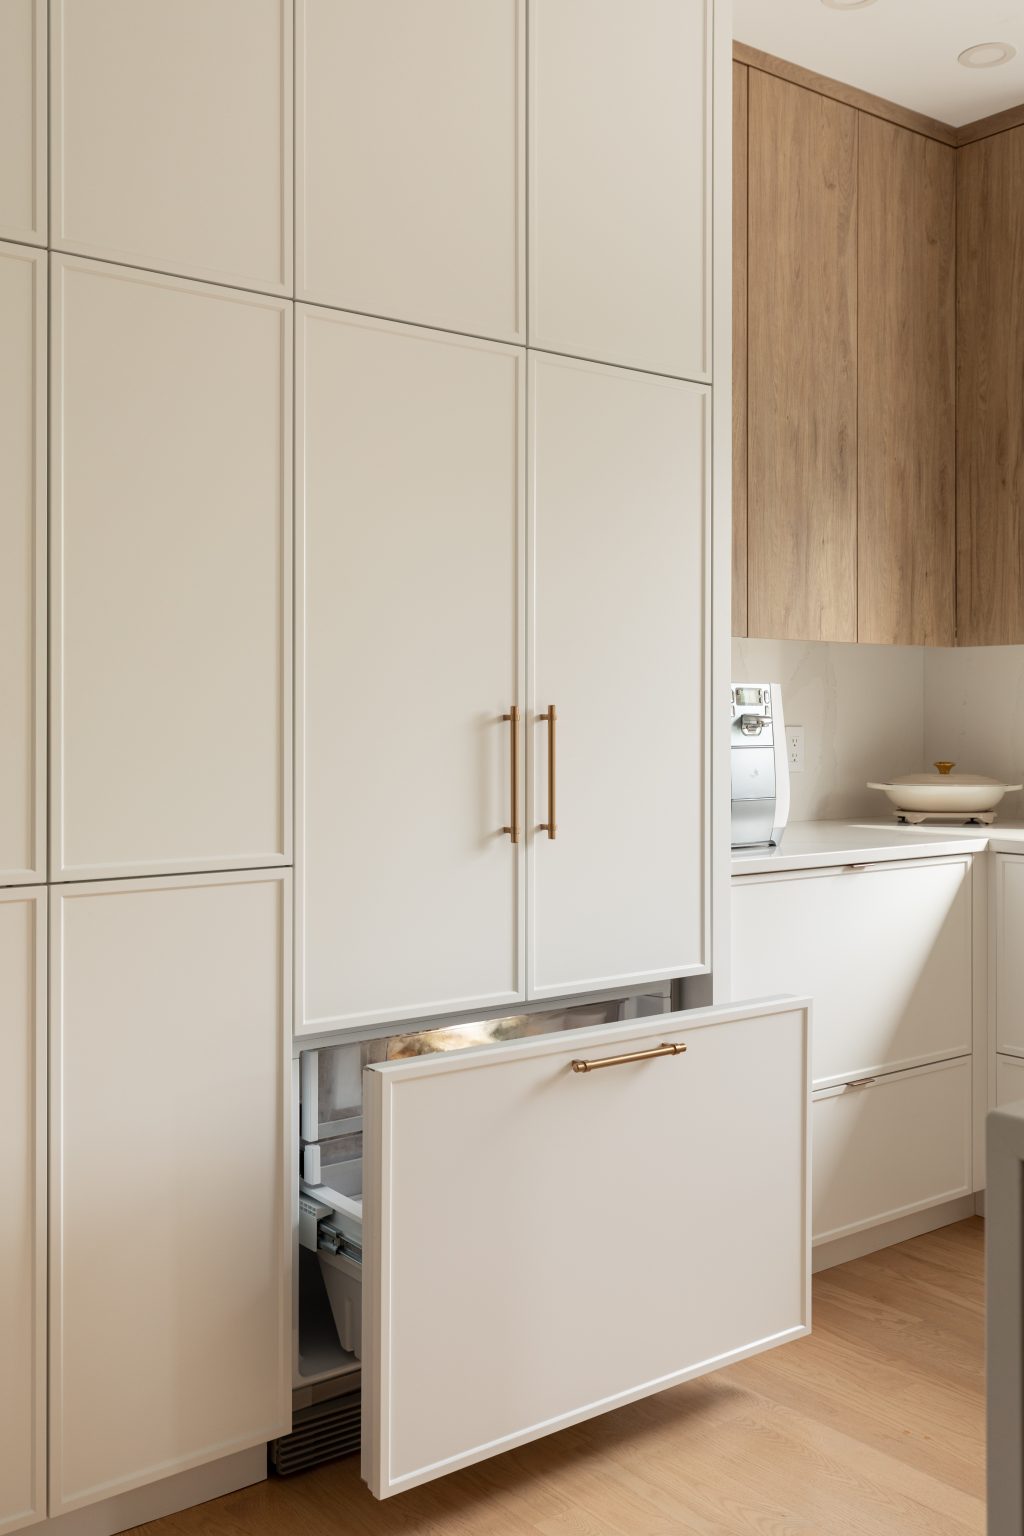 White and oak kitchen cabinets with concealed fridge